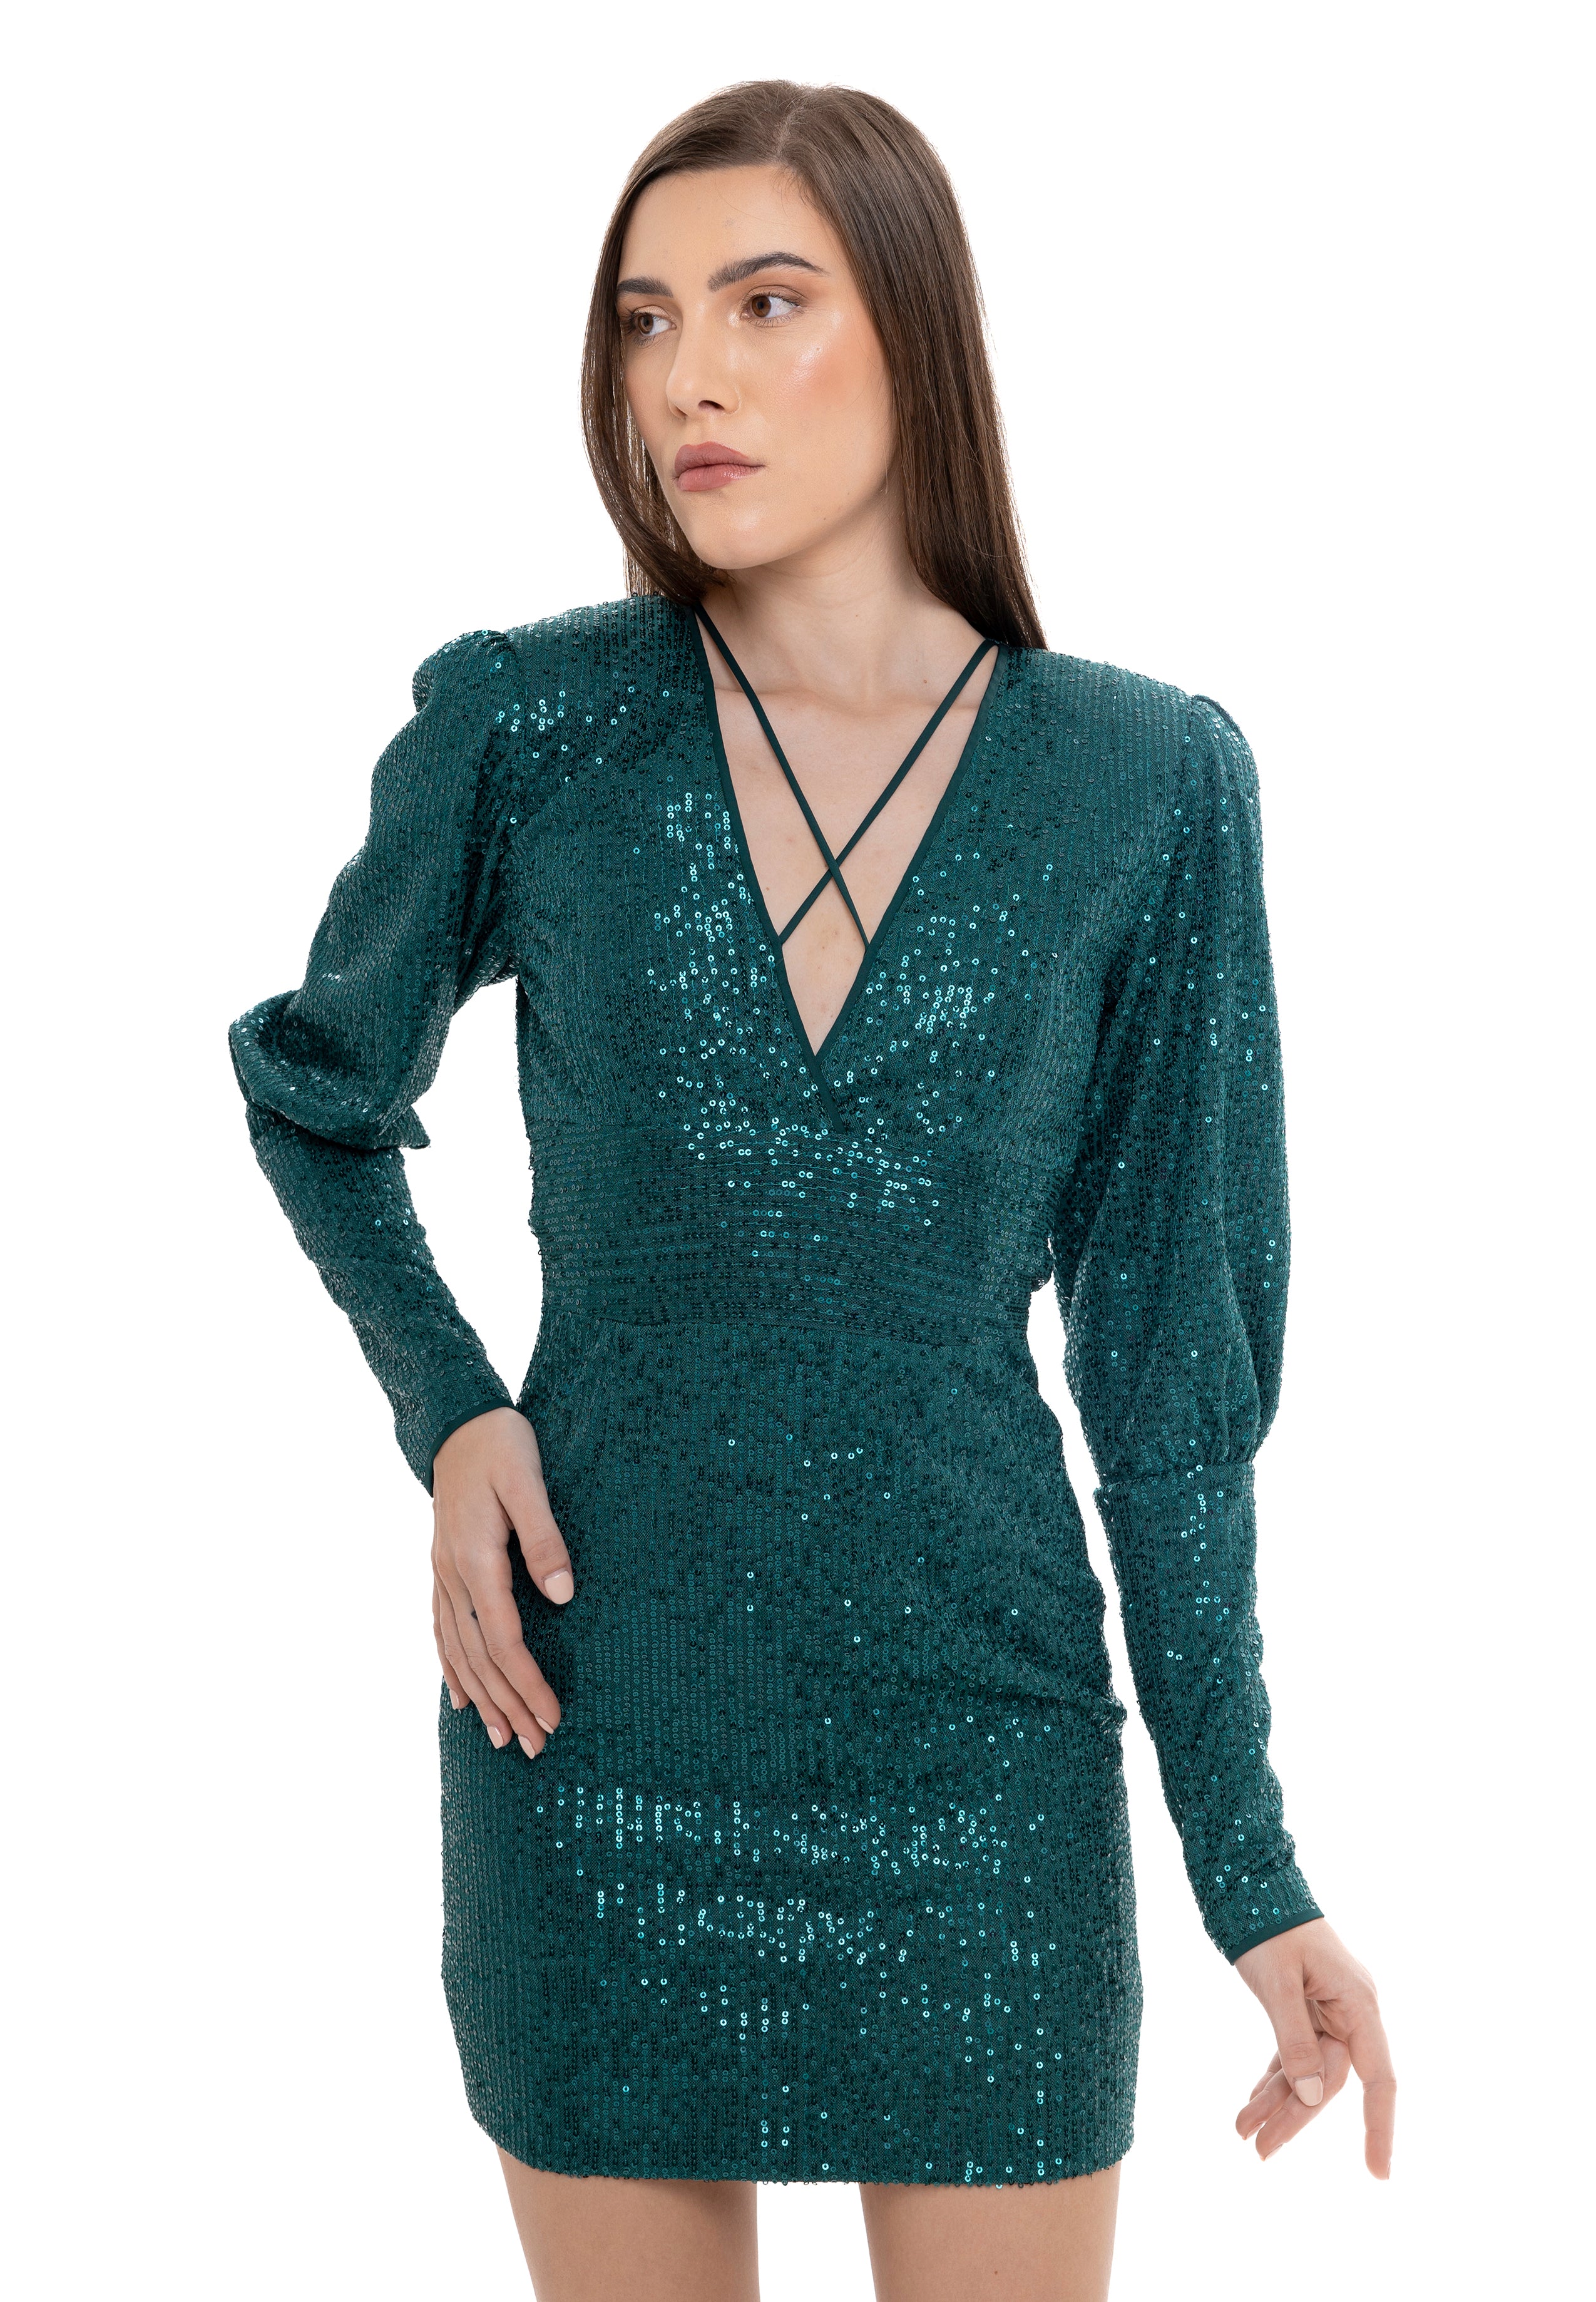 The Glam Short Sequin Dress By Lili Blanc